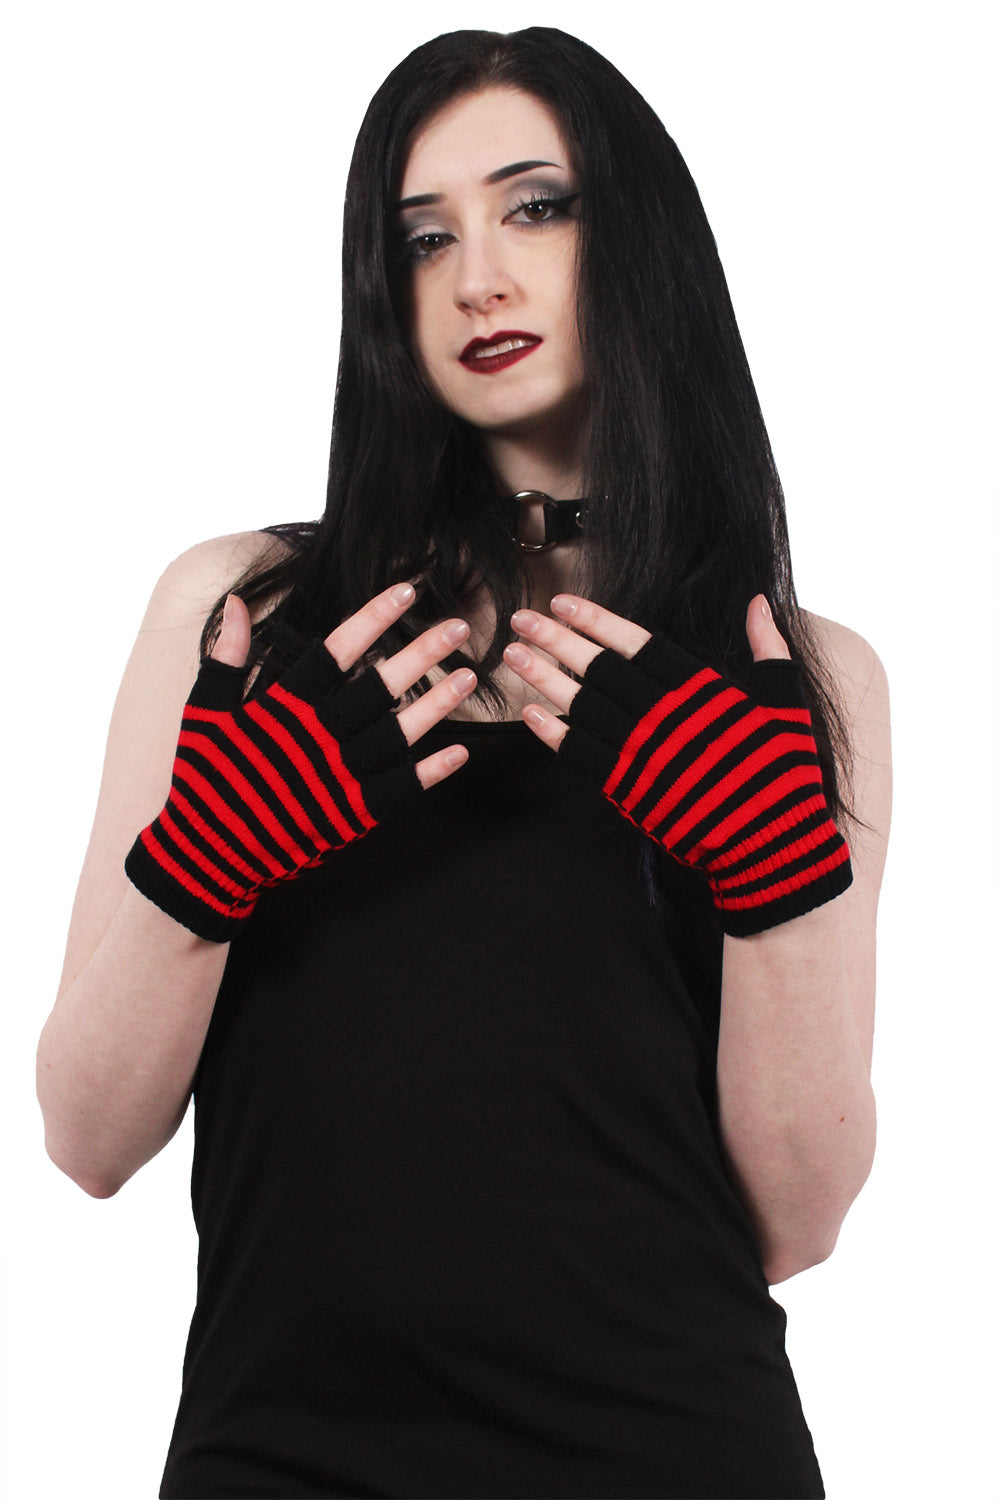 Striped Fingerless Gloves [Multiple Colors Available]